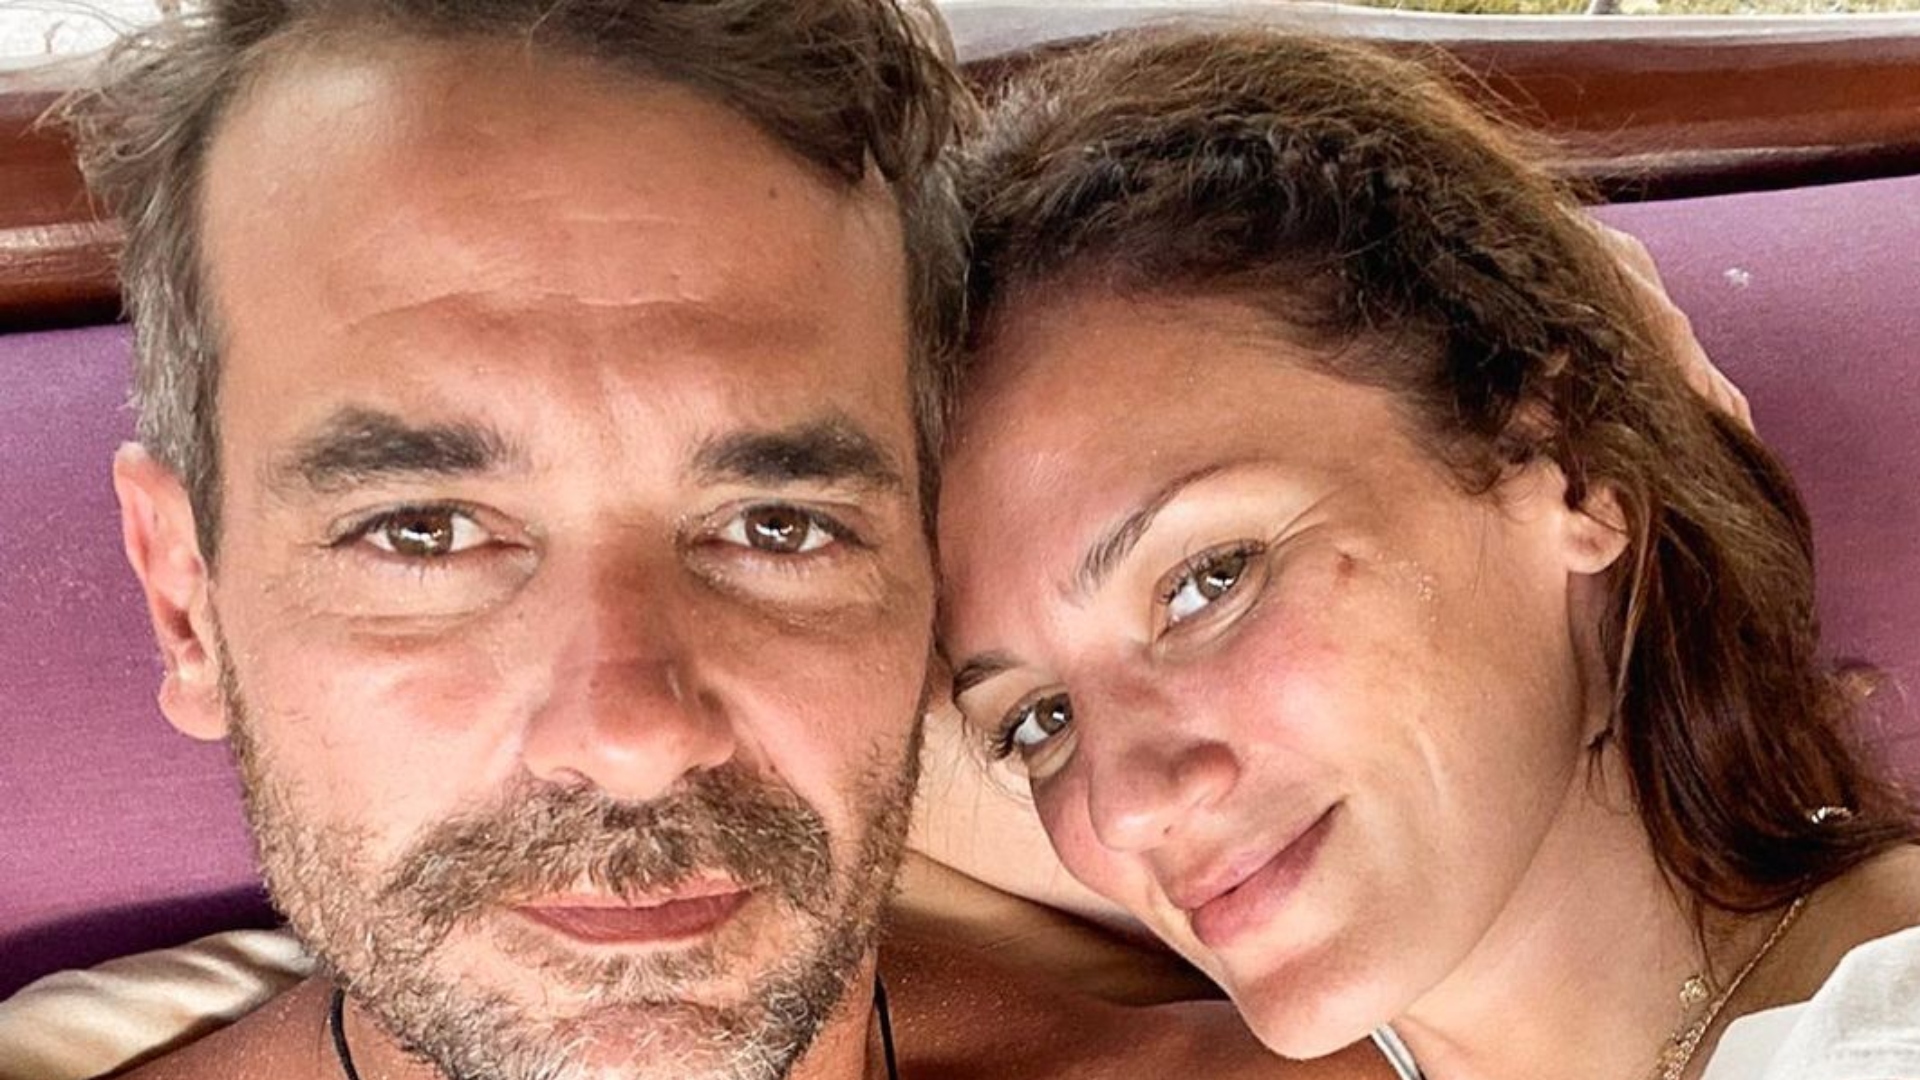 Paula Chaves and Pedro Alfonso celebrate their 12th anniversary